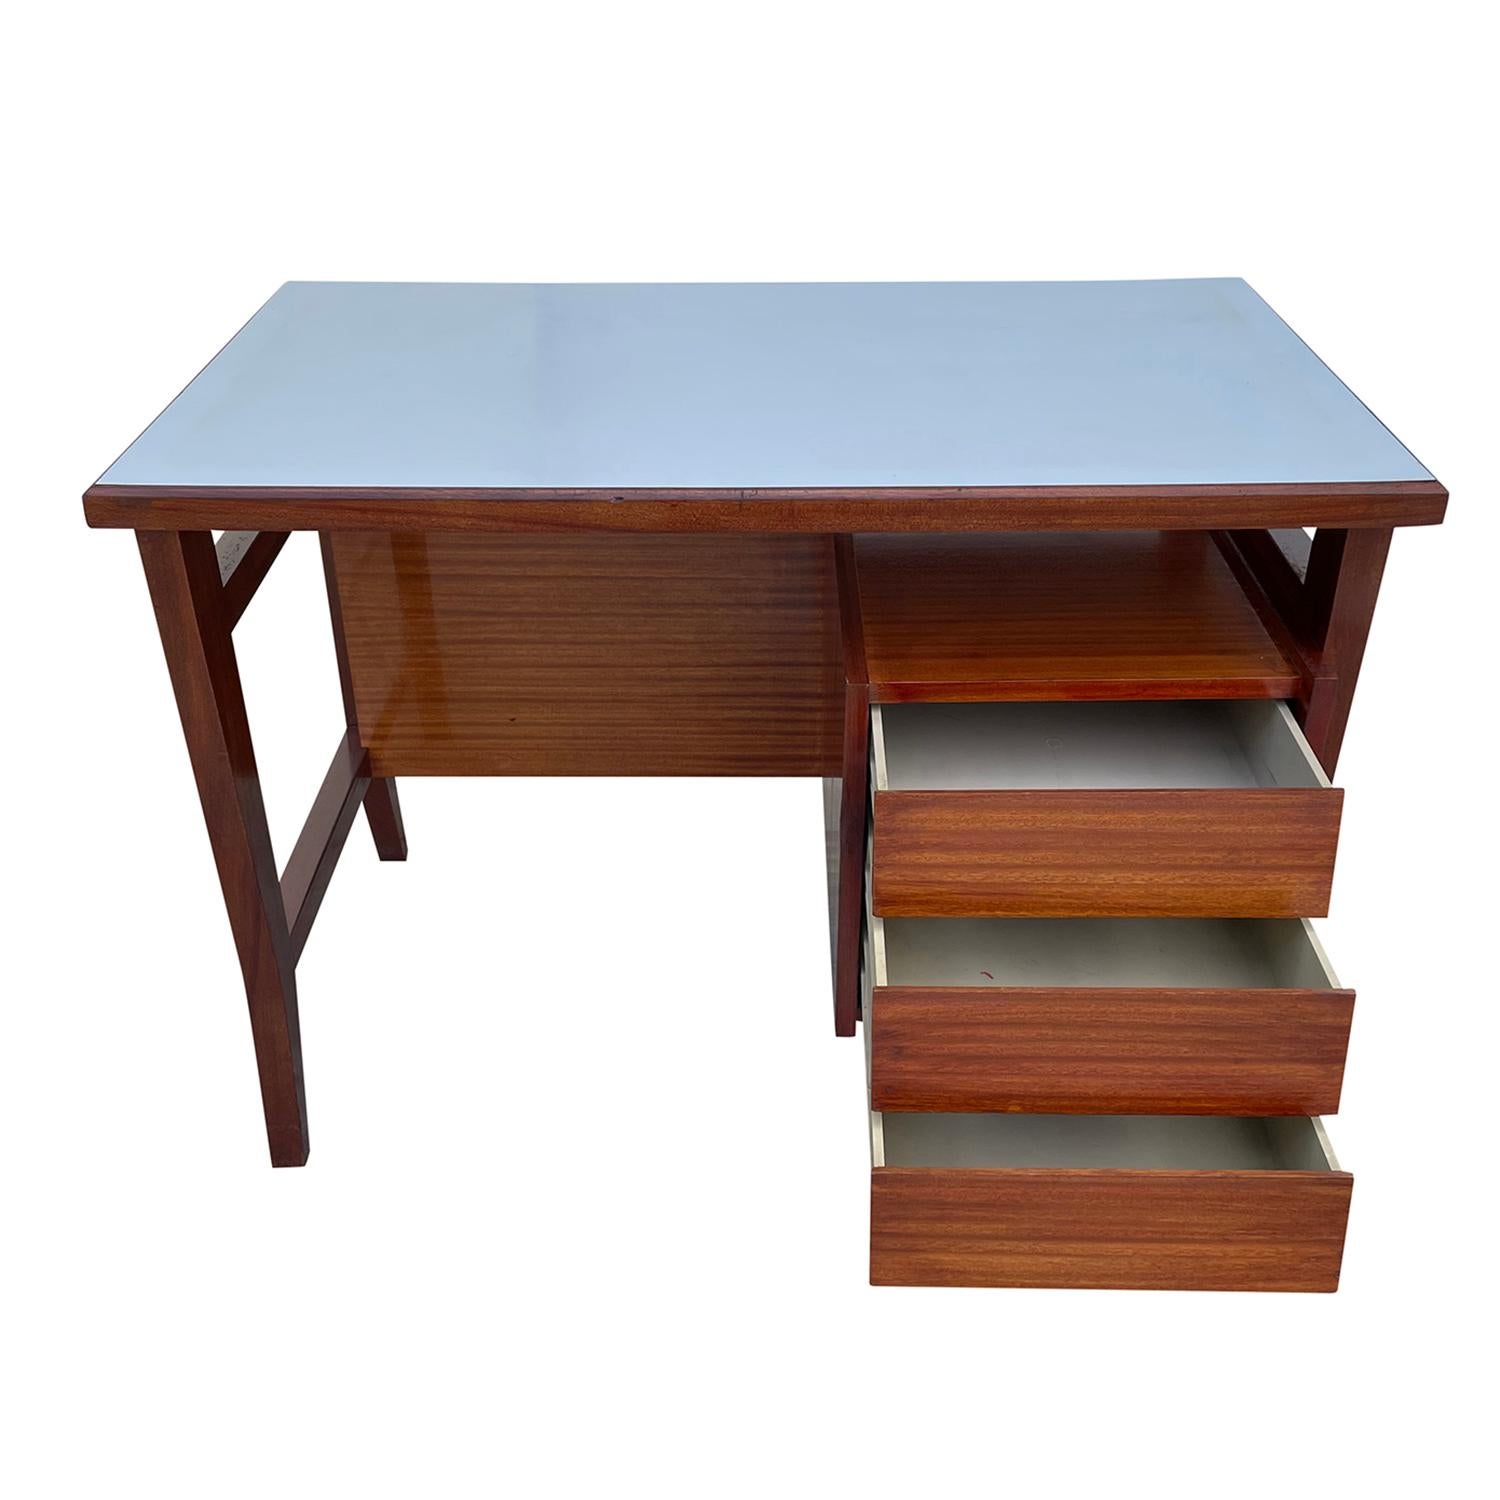 20th Century Italian Small Mahogany Schirolli Mantova Writing Table by Gio Ponti In Good Condition For Sale In West Palm Beach, FL